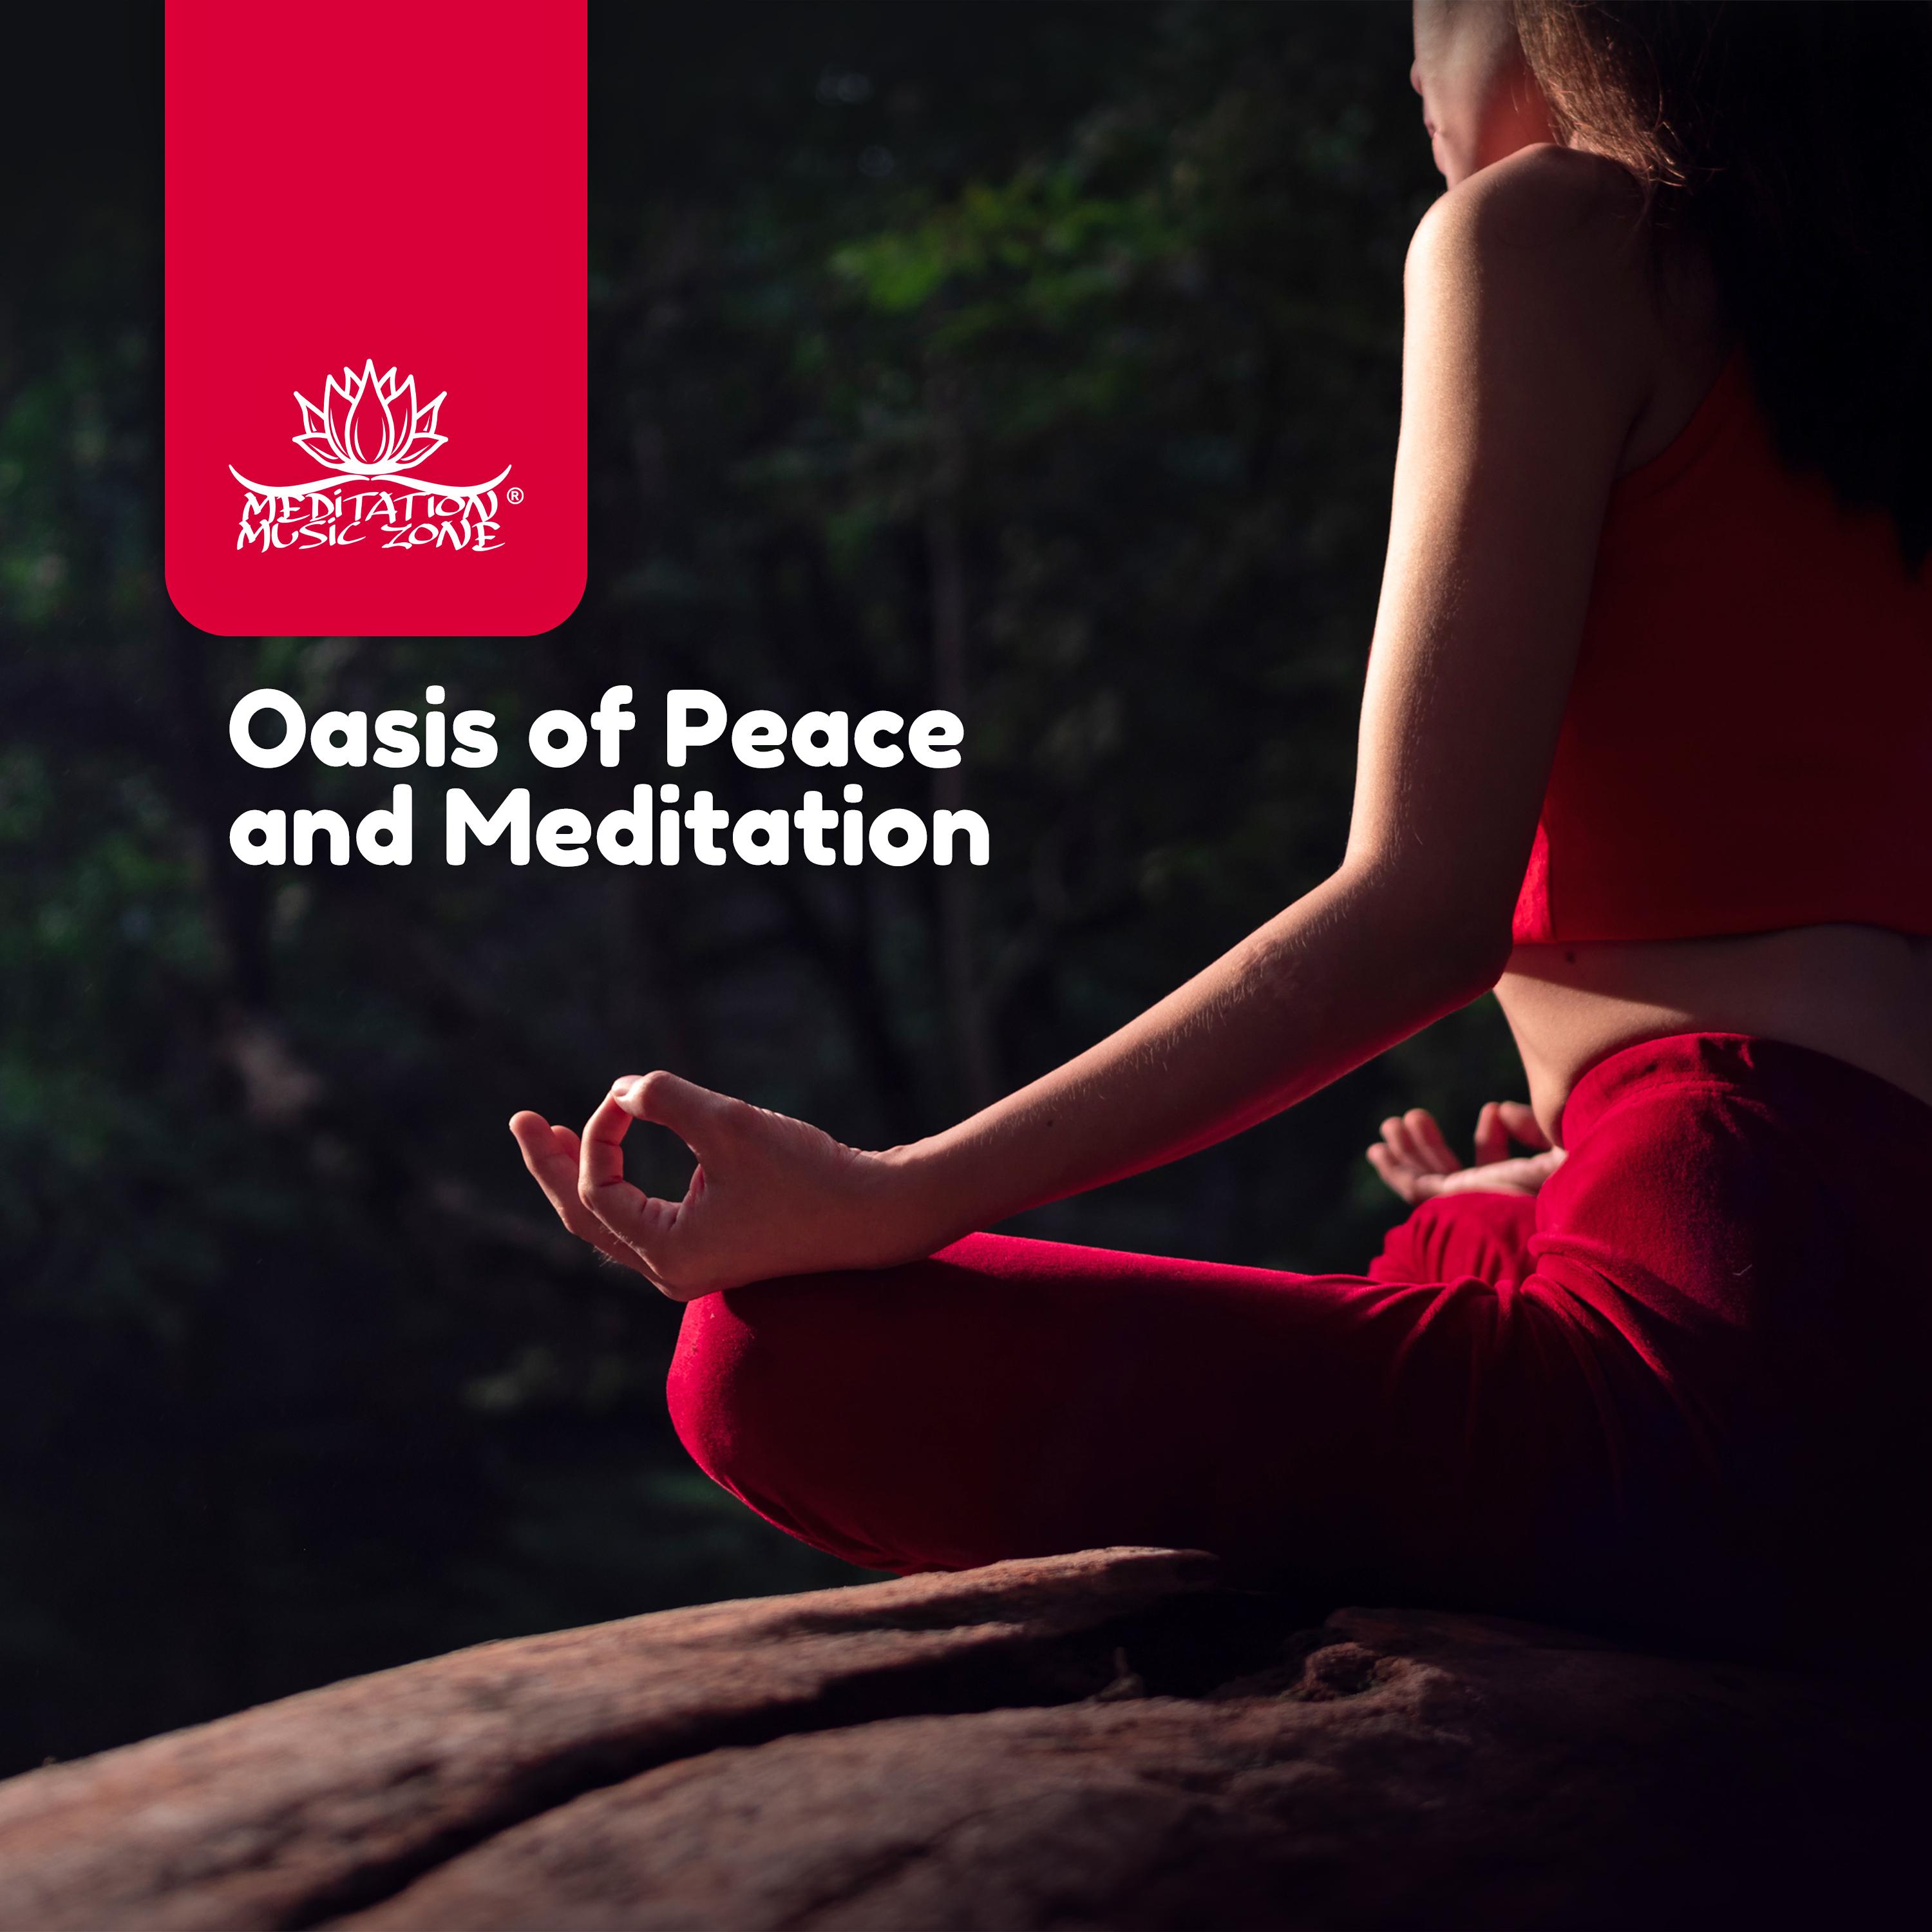 Oasis of Peace and Meditation